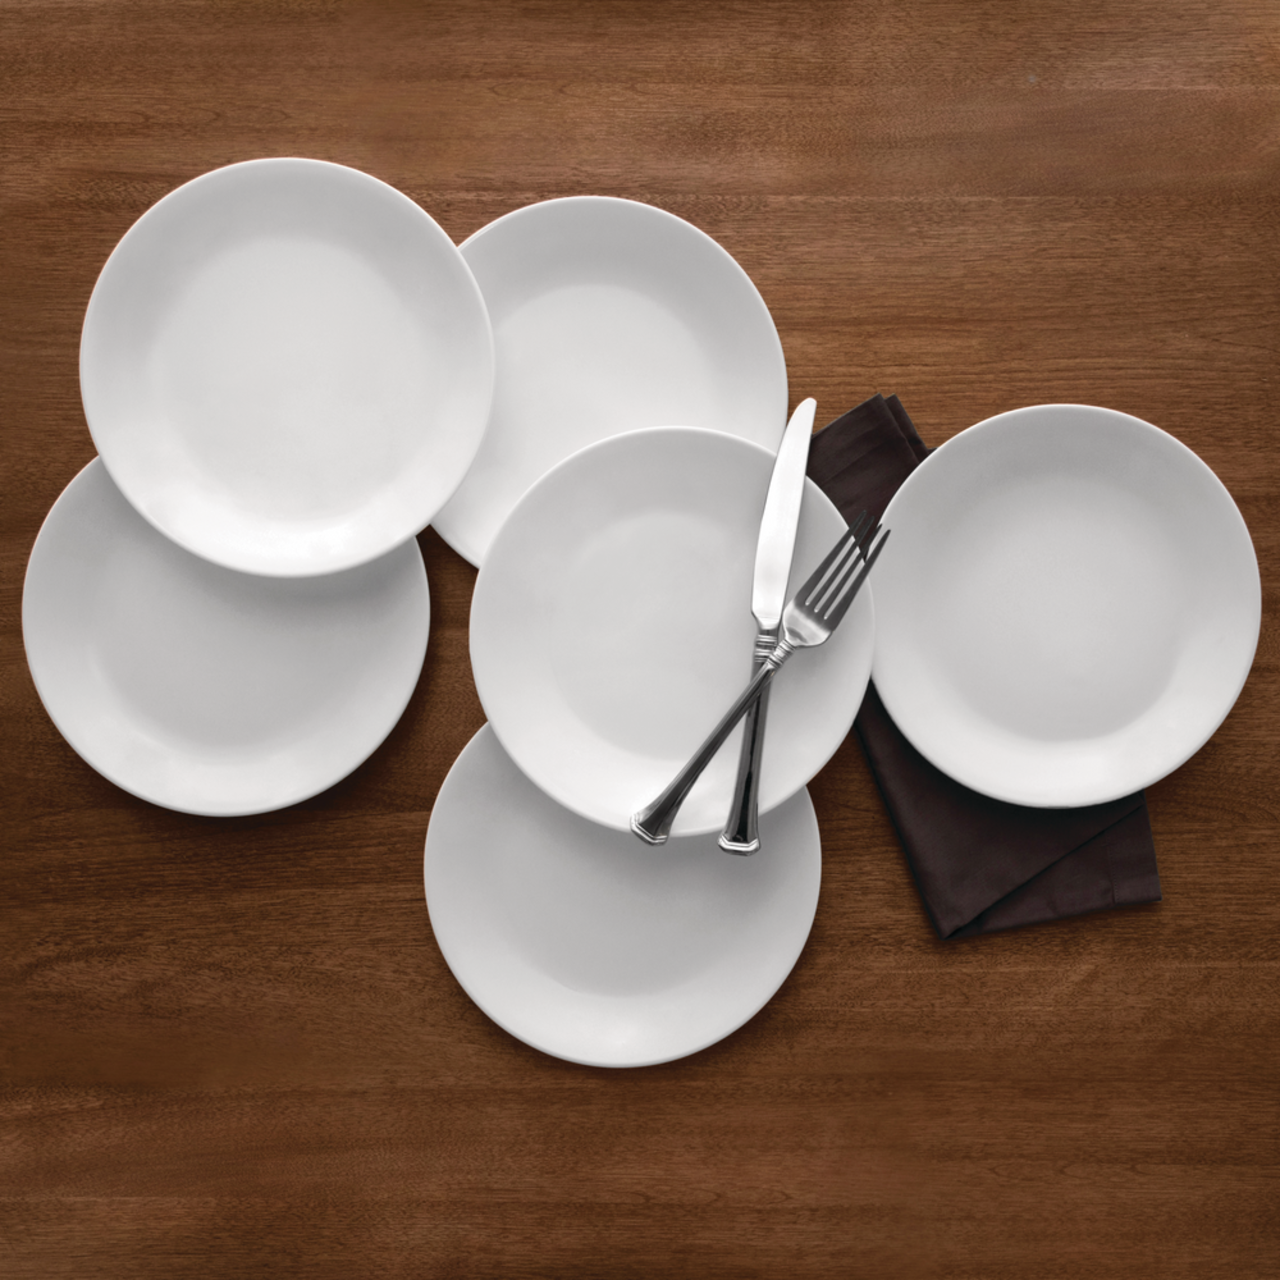 https://media-www.canadiantire.ca/product/living/kitchen/dining-and-entertaining/1424708/corelle-caterer-6-piece-salad-plate-02abbc30-1e5f-40d9-8860-4b0dced9cb38.png?imdensity=1&imwidth=1244&impolicy=mZoom